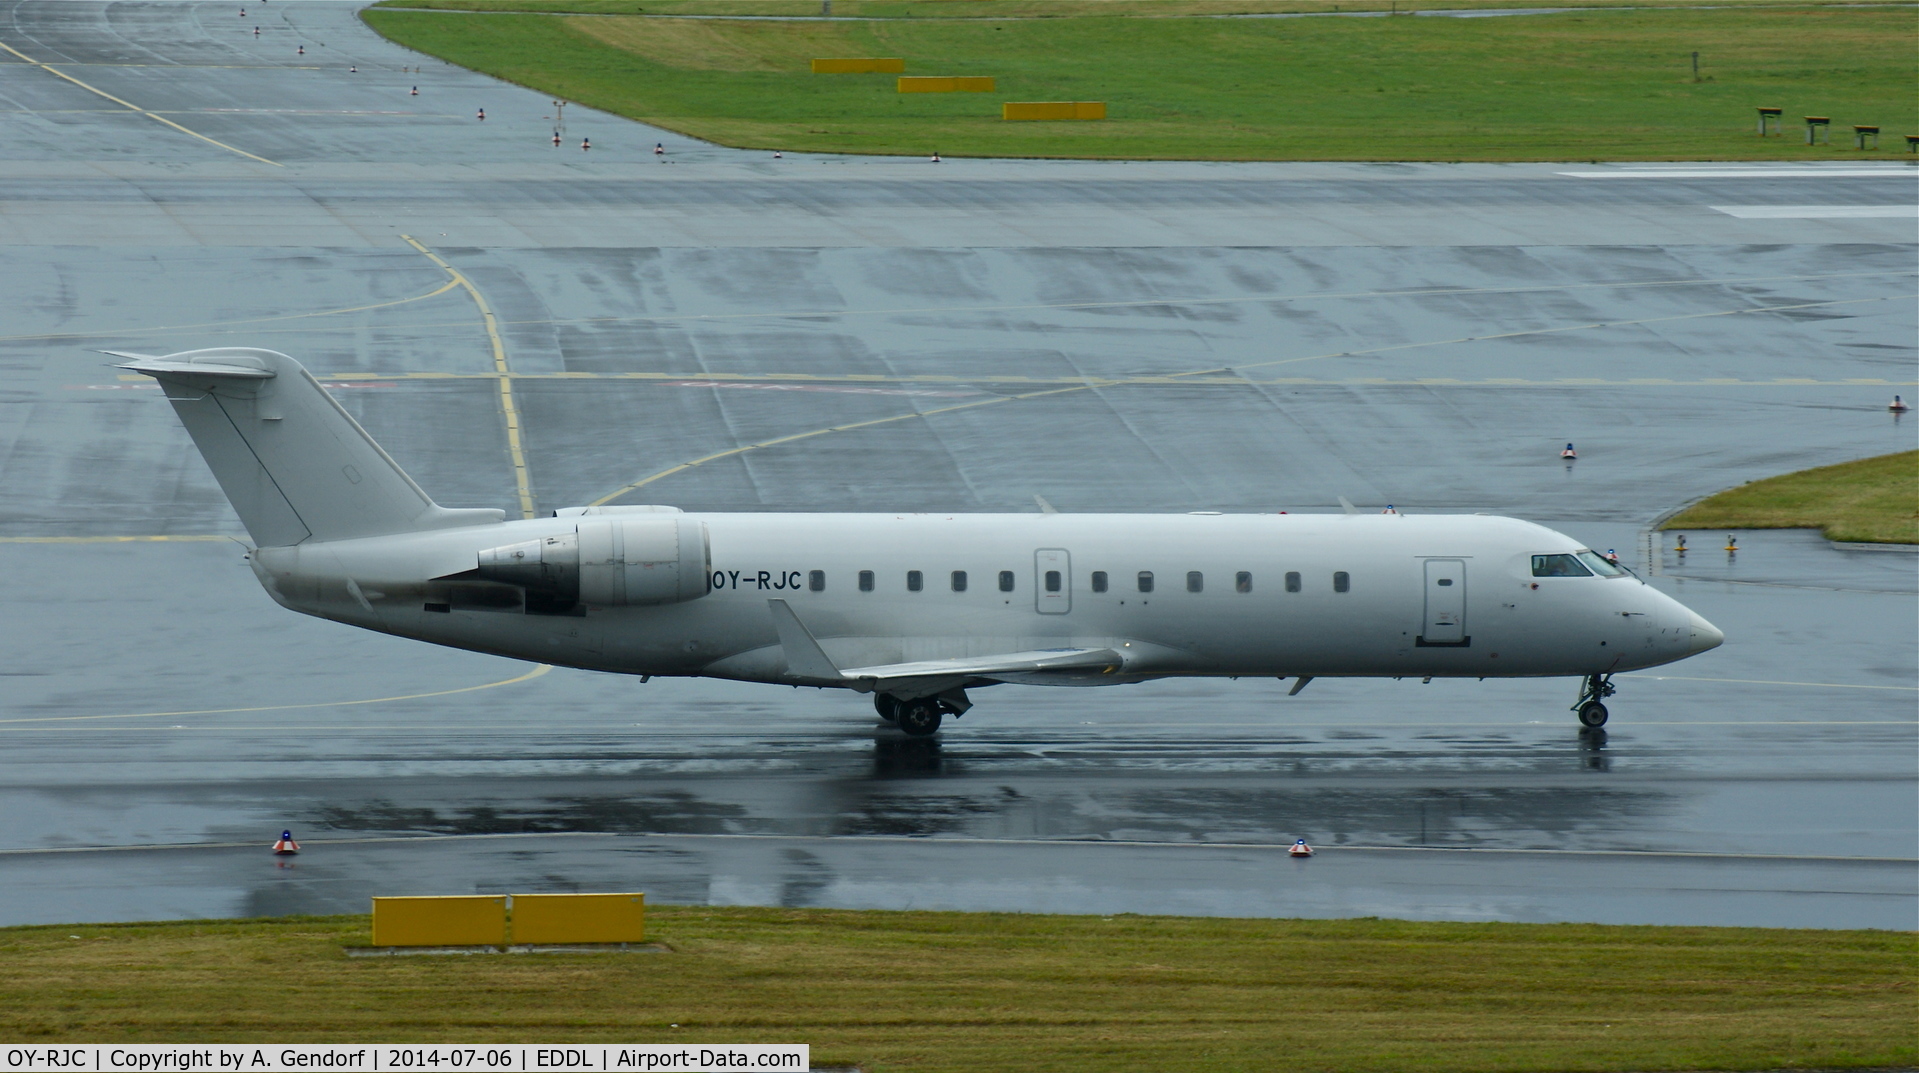 OY-RJC, 1993 Canadair CRJ-100LR (CL-600-2B19) C/N 7015, Cimber AS (all white / untitled), is here on the taxiway at Düsseldorf Int'l(EDDL)